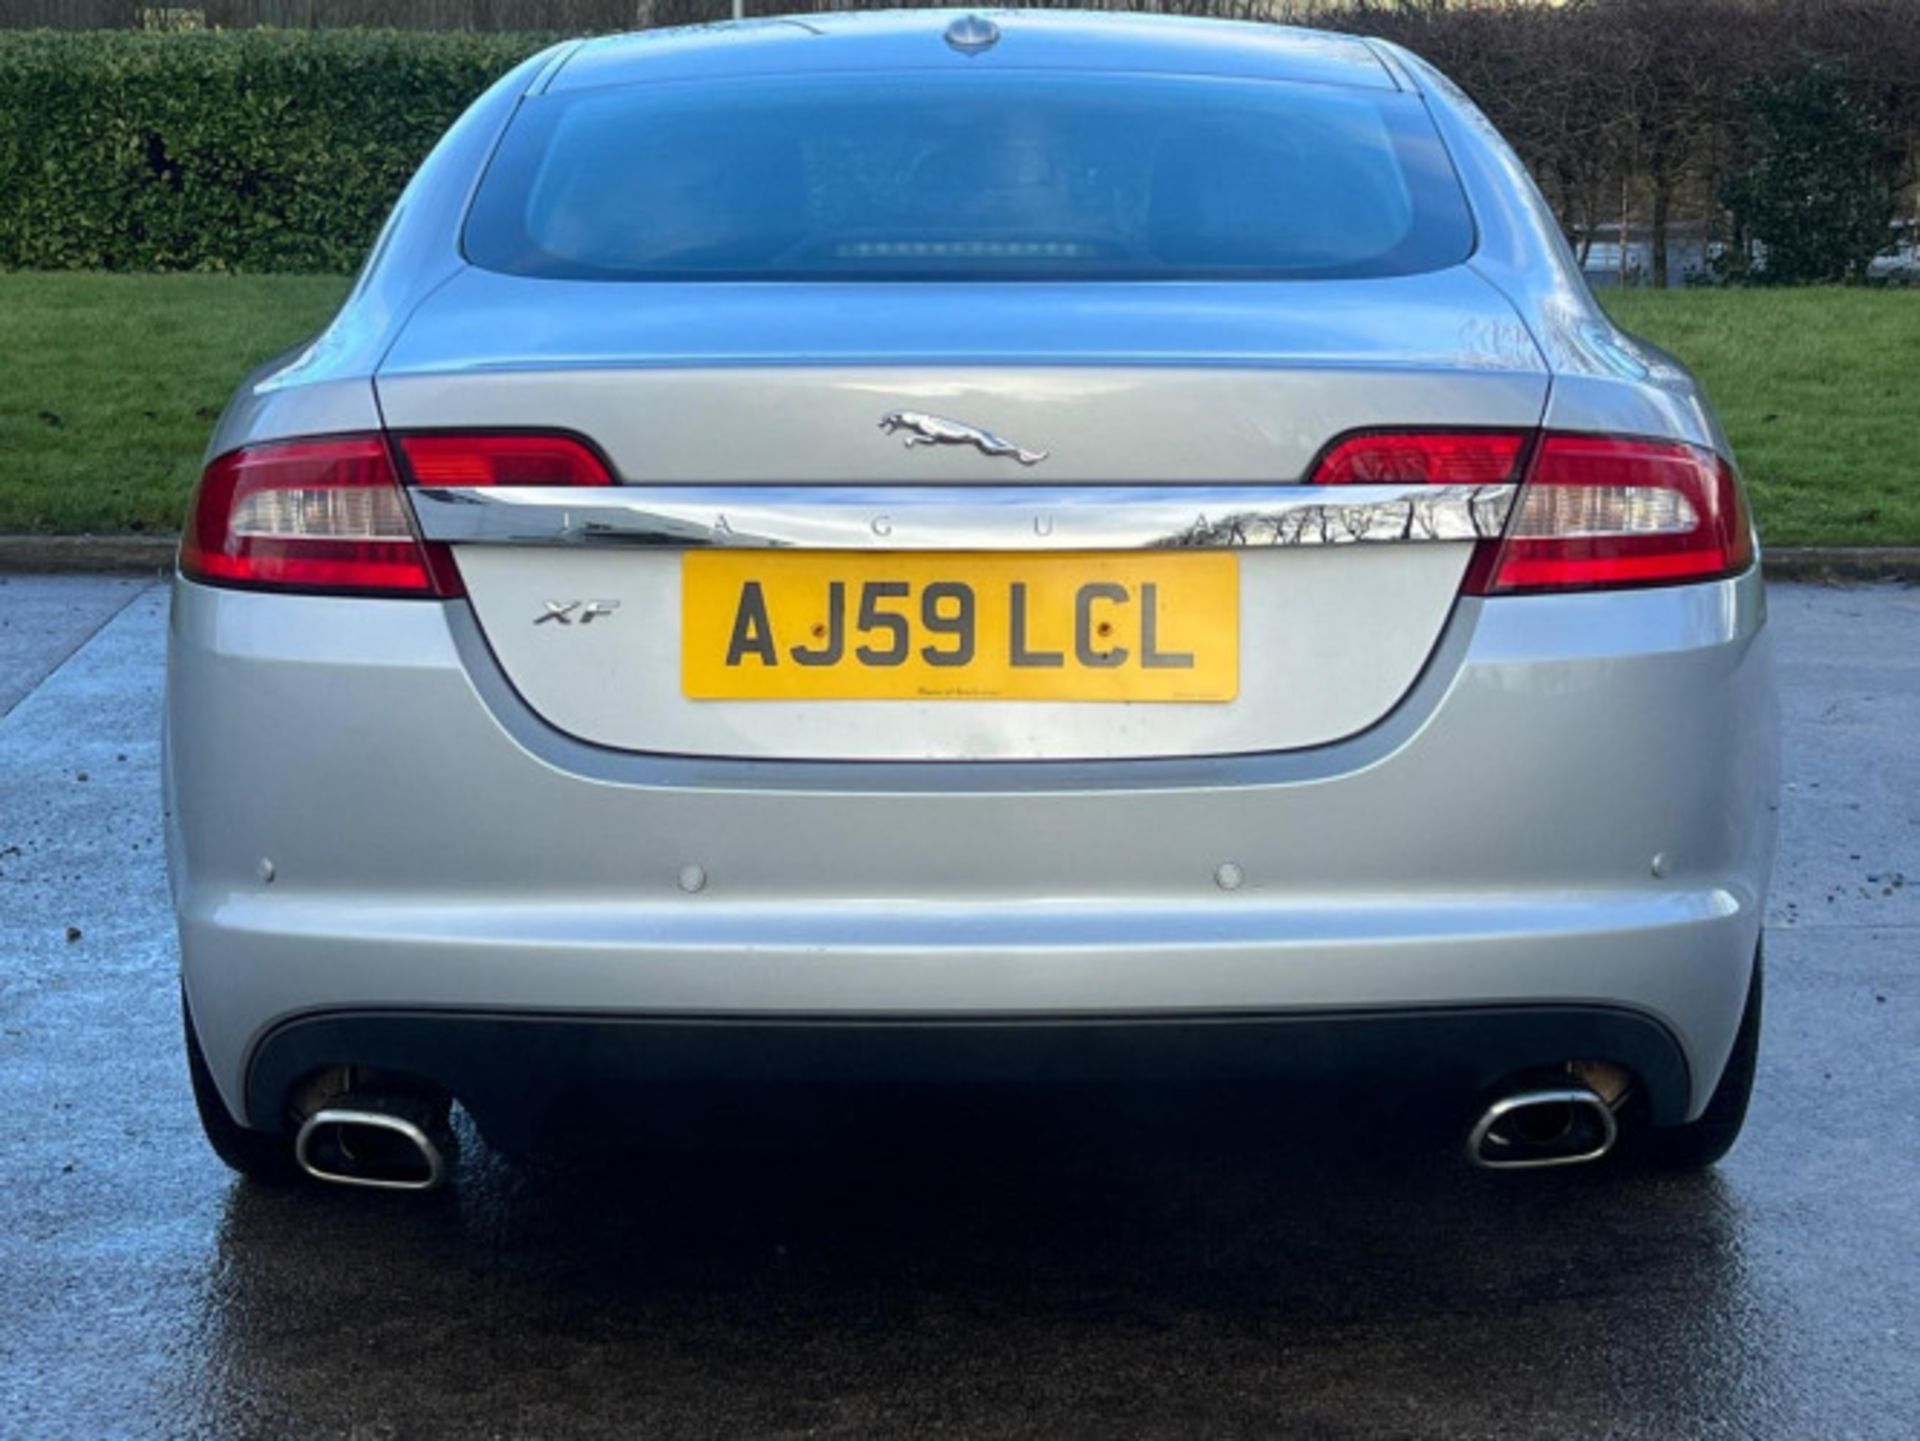 LUXURIOUS JAGUAR XF 3.0D V6 LUXURY 4DR AUTOMATIC SALOON >>--NO VAT ON HAMMER--<< - Image 76 of 80